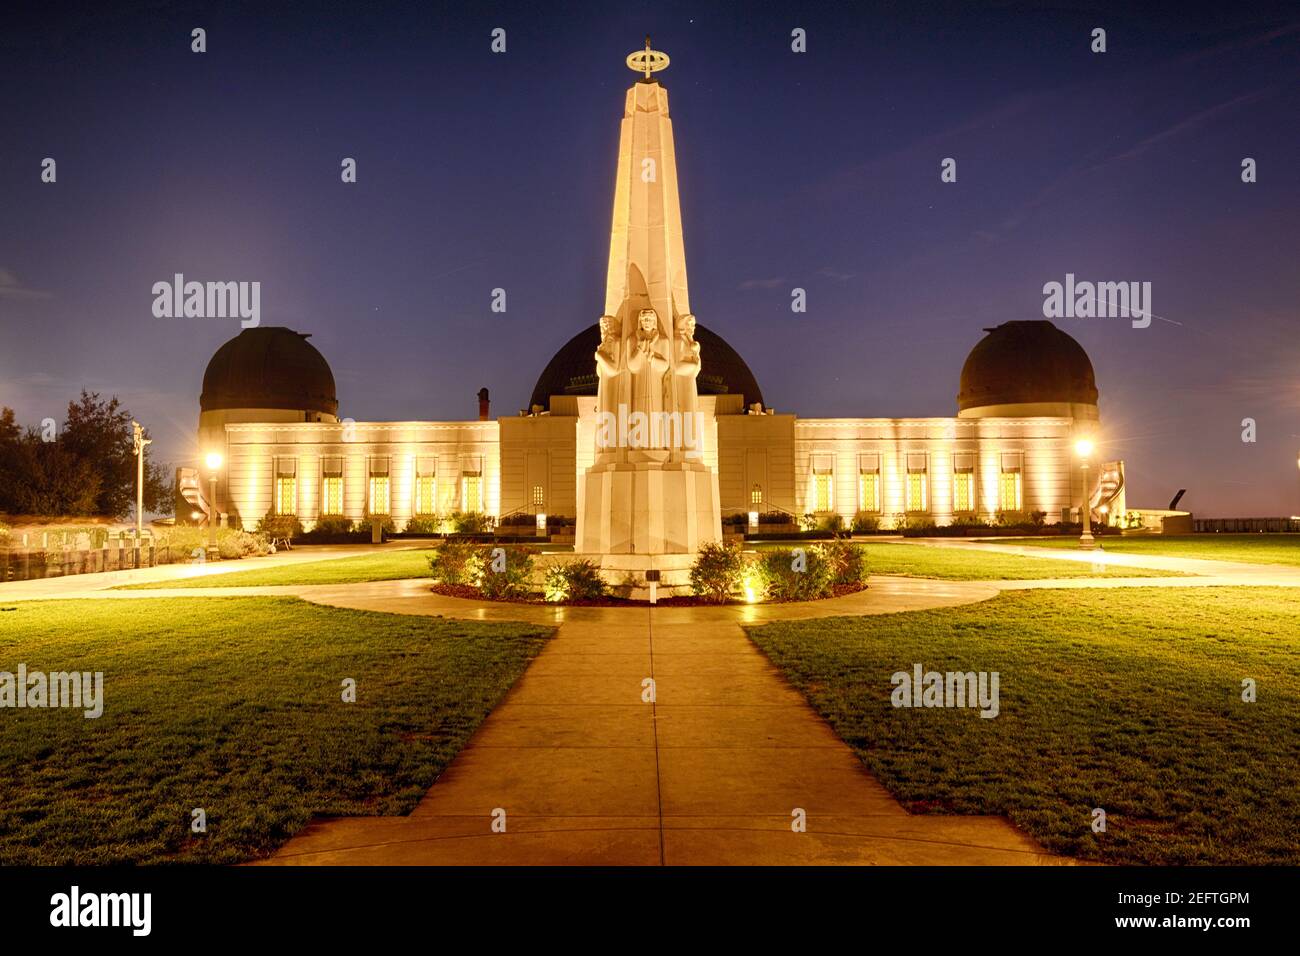 Griffith Obsewrvatory  At Night, Los Angeles, California Stock Photo